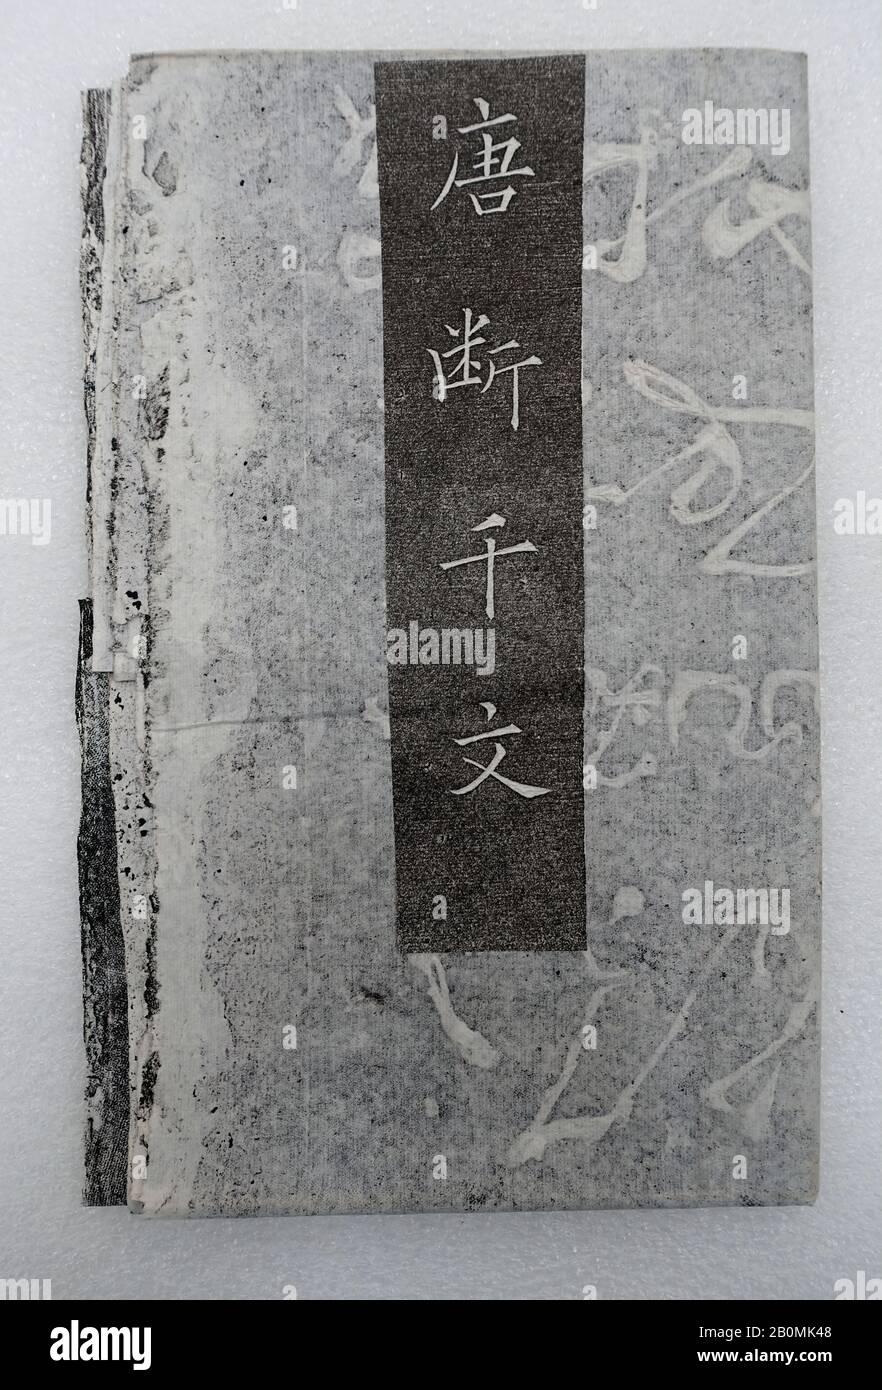 Fragmentary 1000-character essay written in cursive script in the Tang dynasty, China, 20th century, China, Ink on paper, Image (a): 12 1/2 in. × 43 in. (31.8 × 109.2 cm), Image (b): 12 3/4 × 32 1/2 in. (32.4 × 82.6 cm), Image (c): 21 1/2 in. × 21 in. (54.6 × 53.3 cm), Image (d): 11 1/4 in. × 19 in. (28.6 × 48.3 cm), Image (e): 11 1/4 in. × 30 in. (28.6 × 76.2 cm), Rubbing Stock Photo